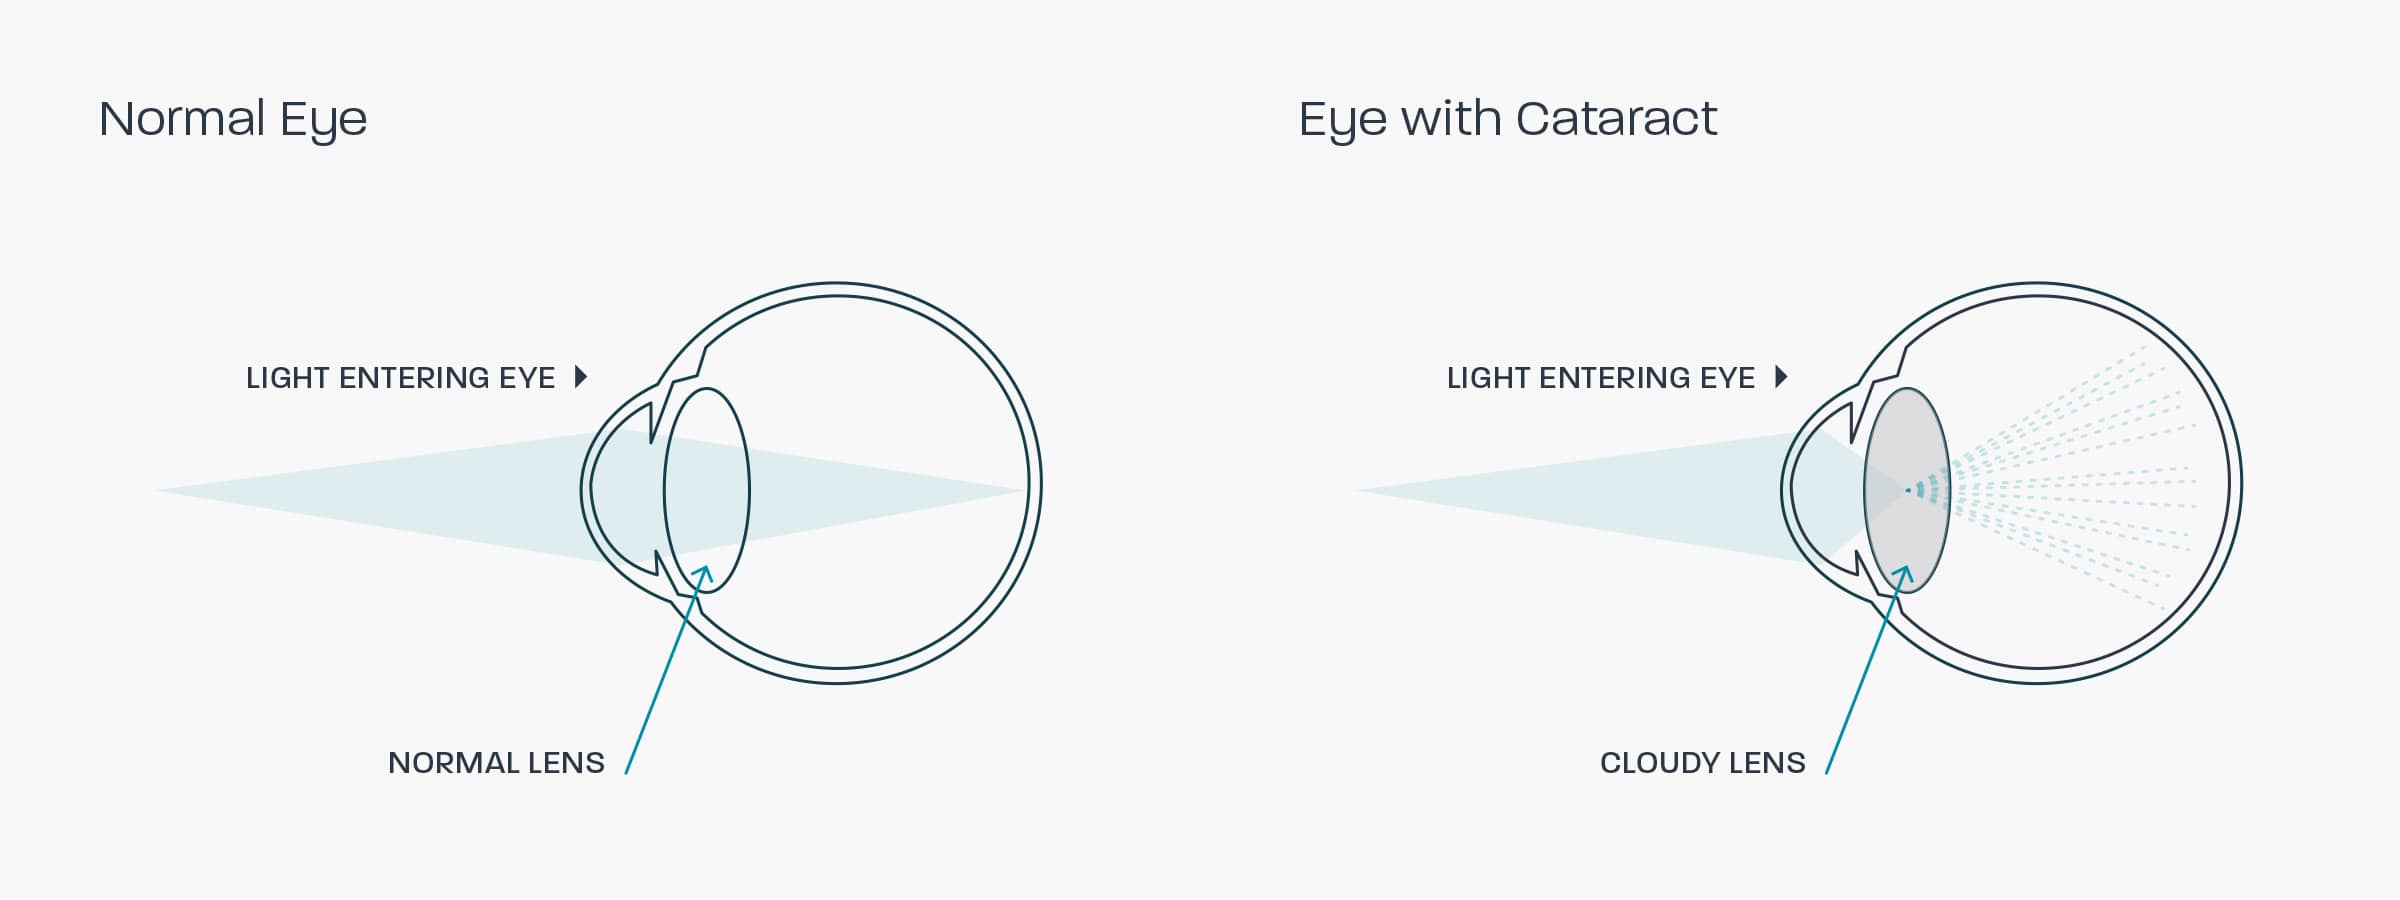 A graphic showing how cataracts affect the eye